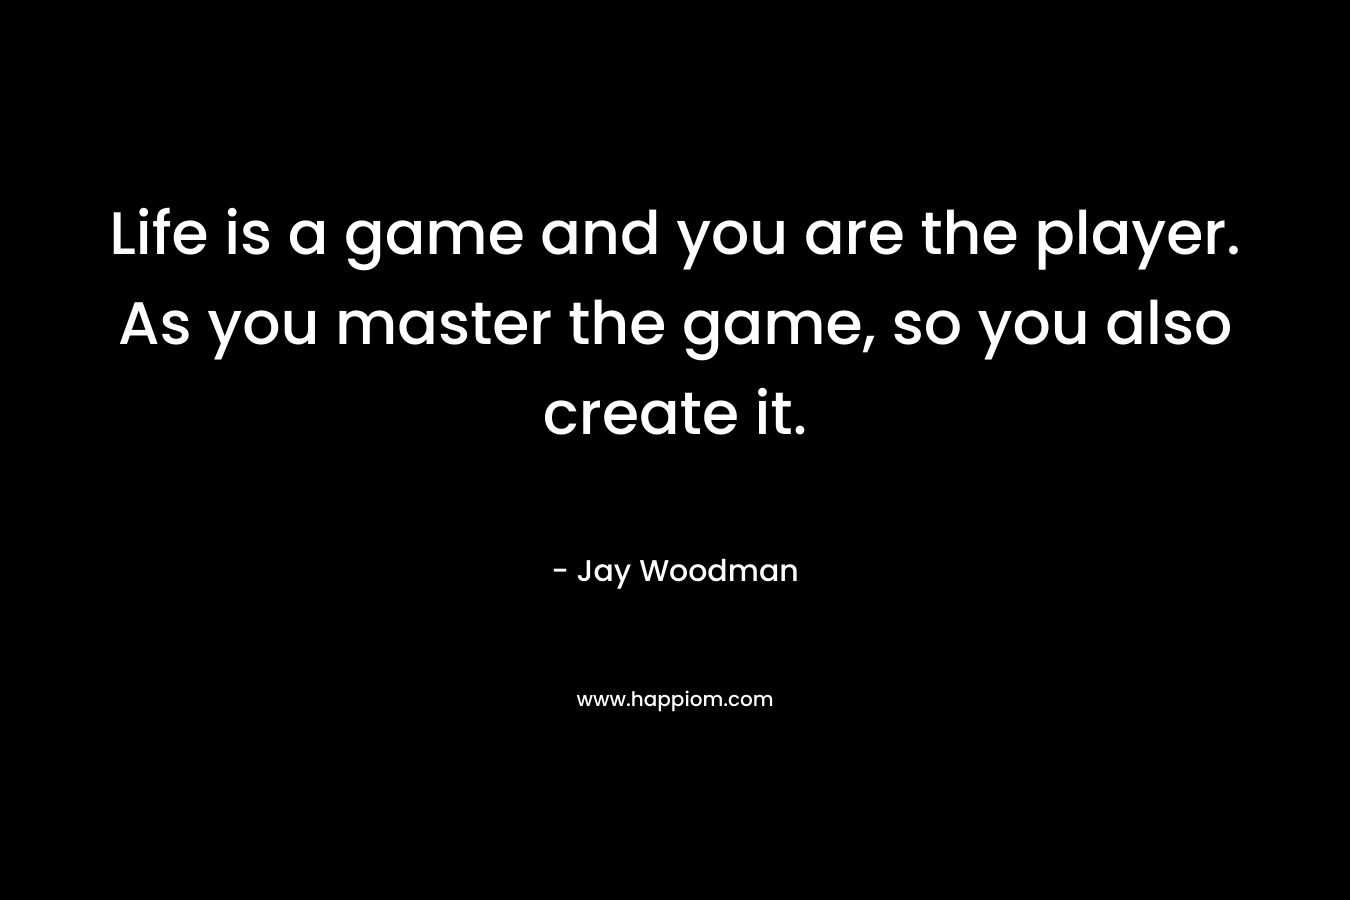 Life is a game and you are the player. As you master the game, so you also create it. – Jay Woodman